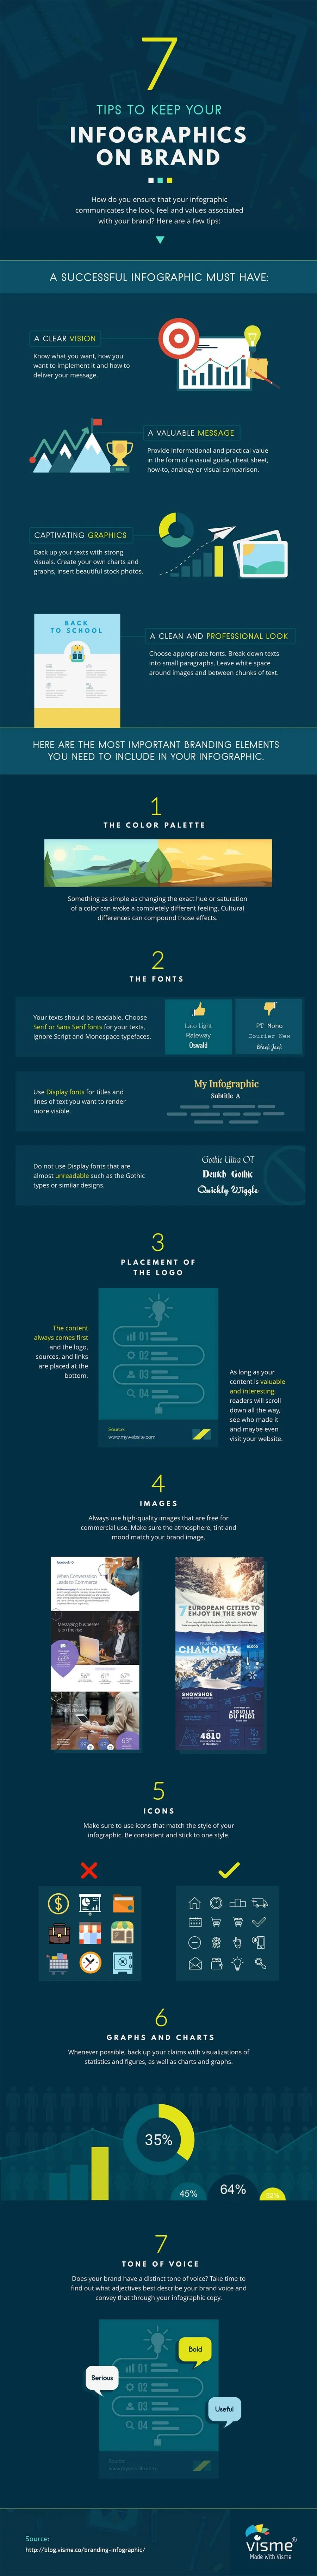 7 Ways to Keep Your Infographics On Brand - #infographic